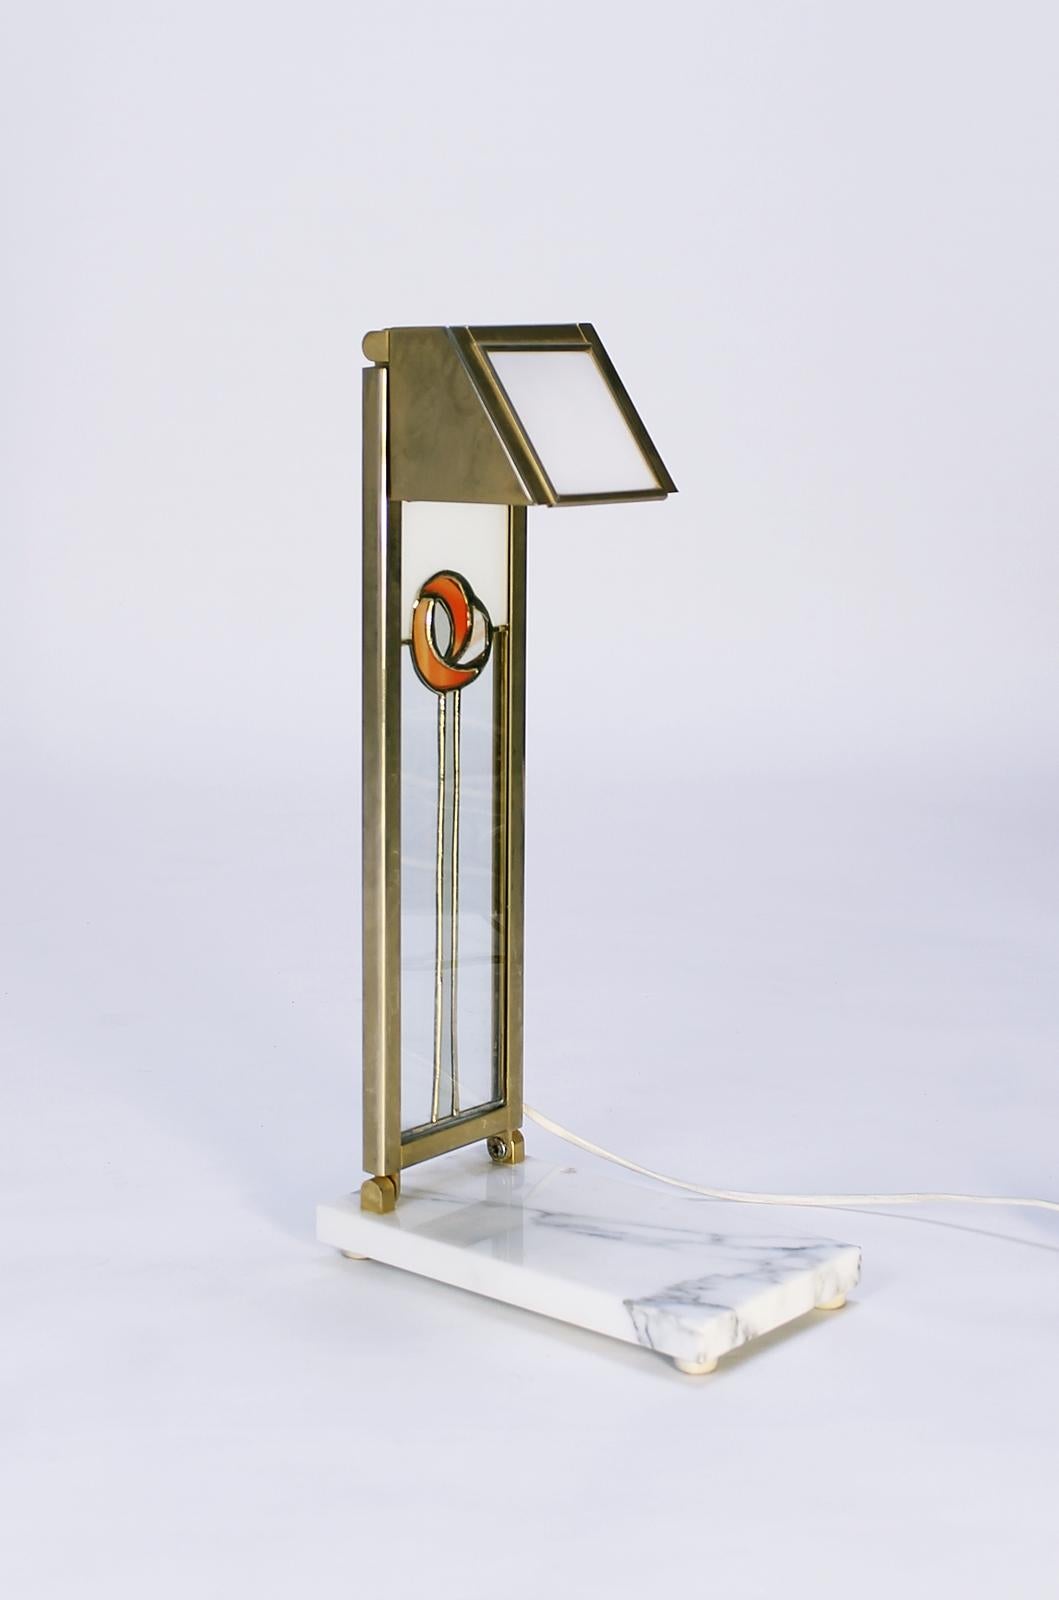 This unique vintage desk lamp is inspired by the Glasgow Art School and features Charles Rennie Mackintosh design elements.
It can be adjustable in several directions. Opal glass and brass plates on faux marble basis. Original wiring. It takes a